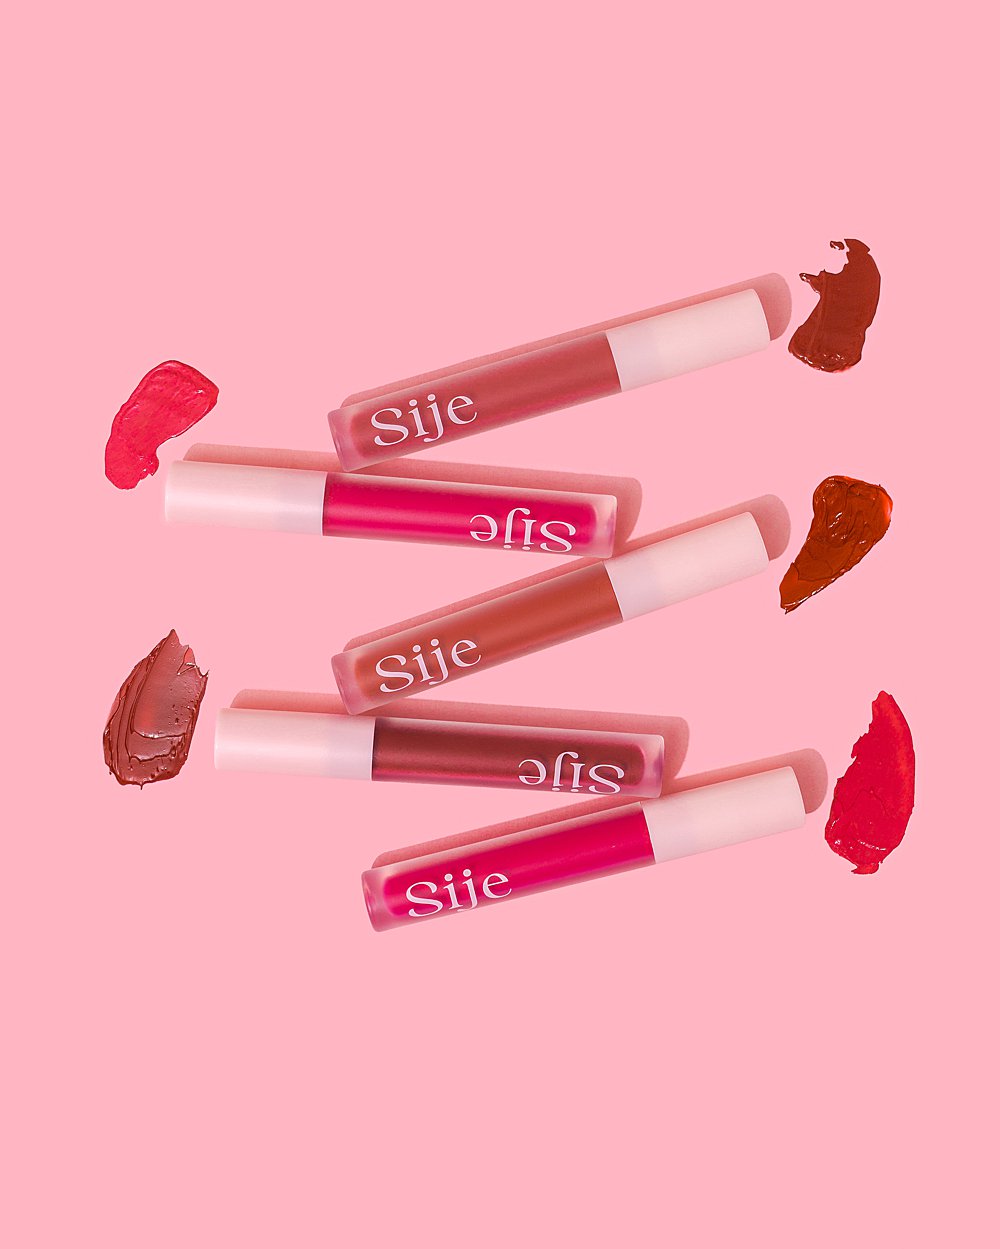 Colourful content creation and creative still life photography for Sije cosmetics. Product photography, art direction and styling by HIYA MARIANNE.